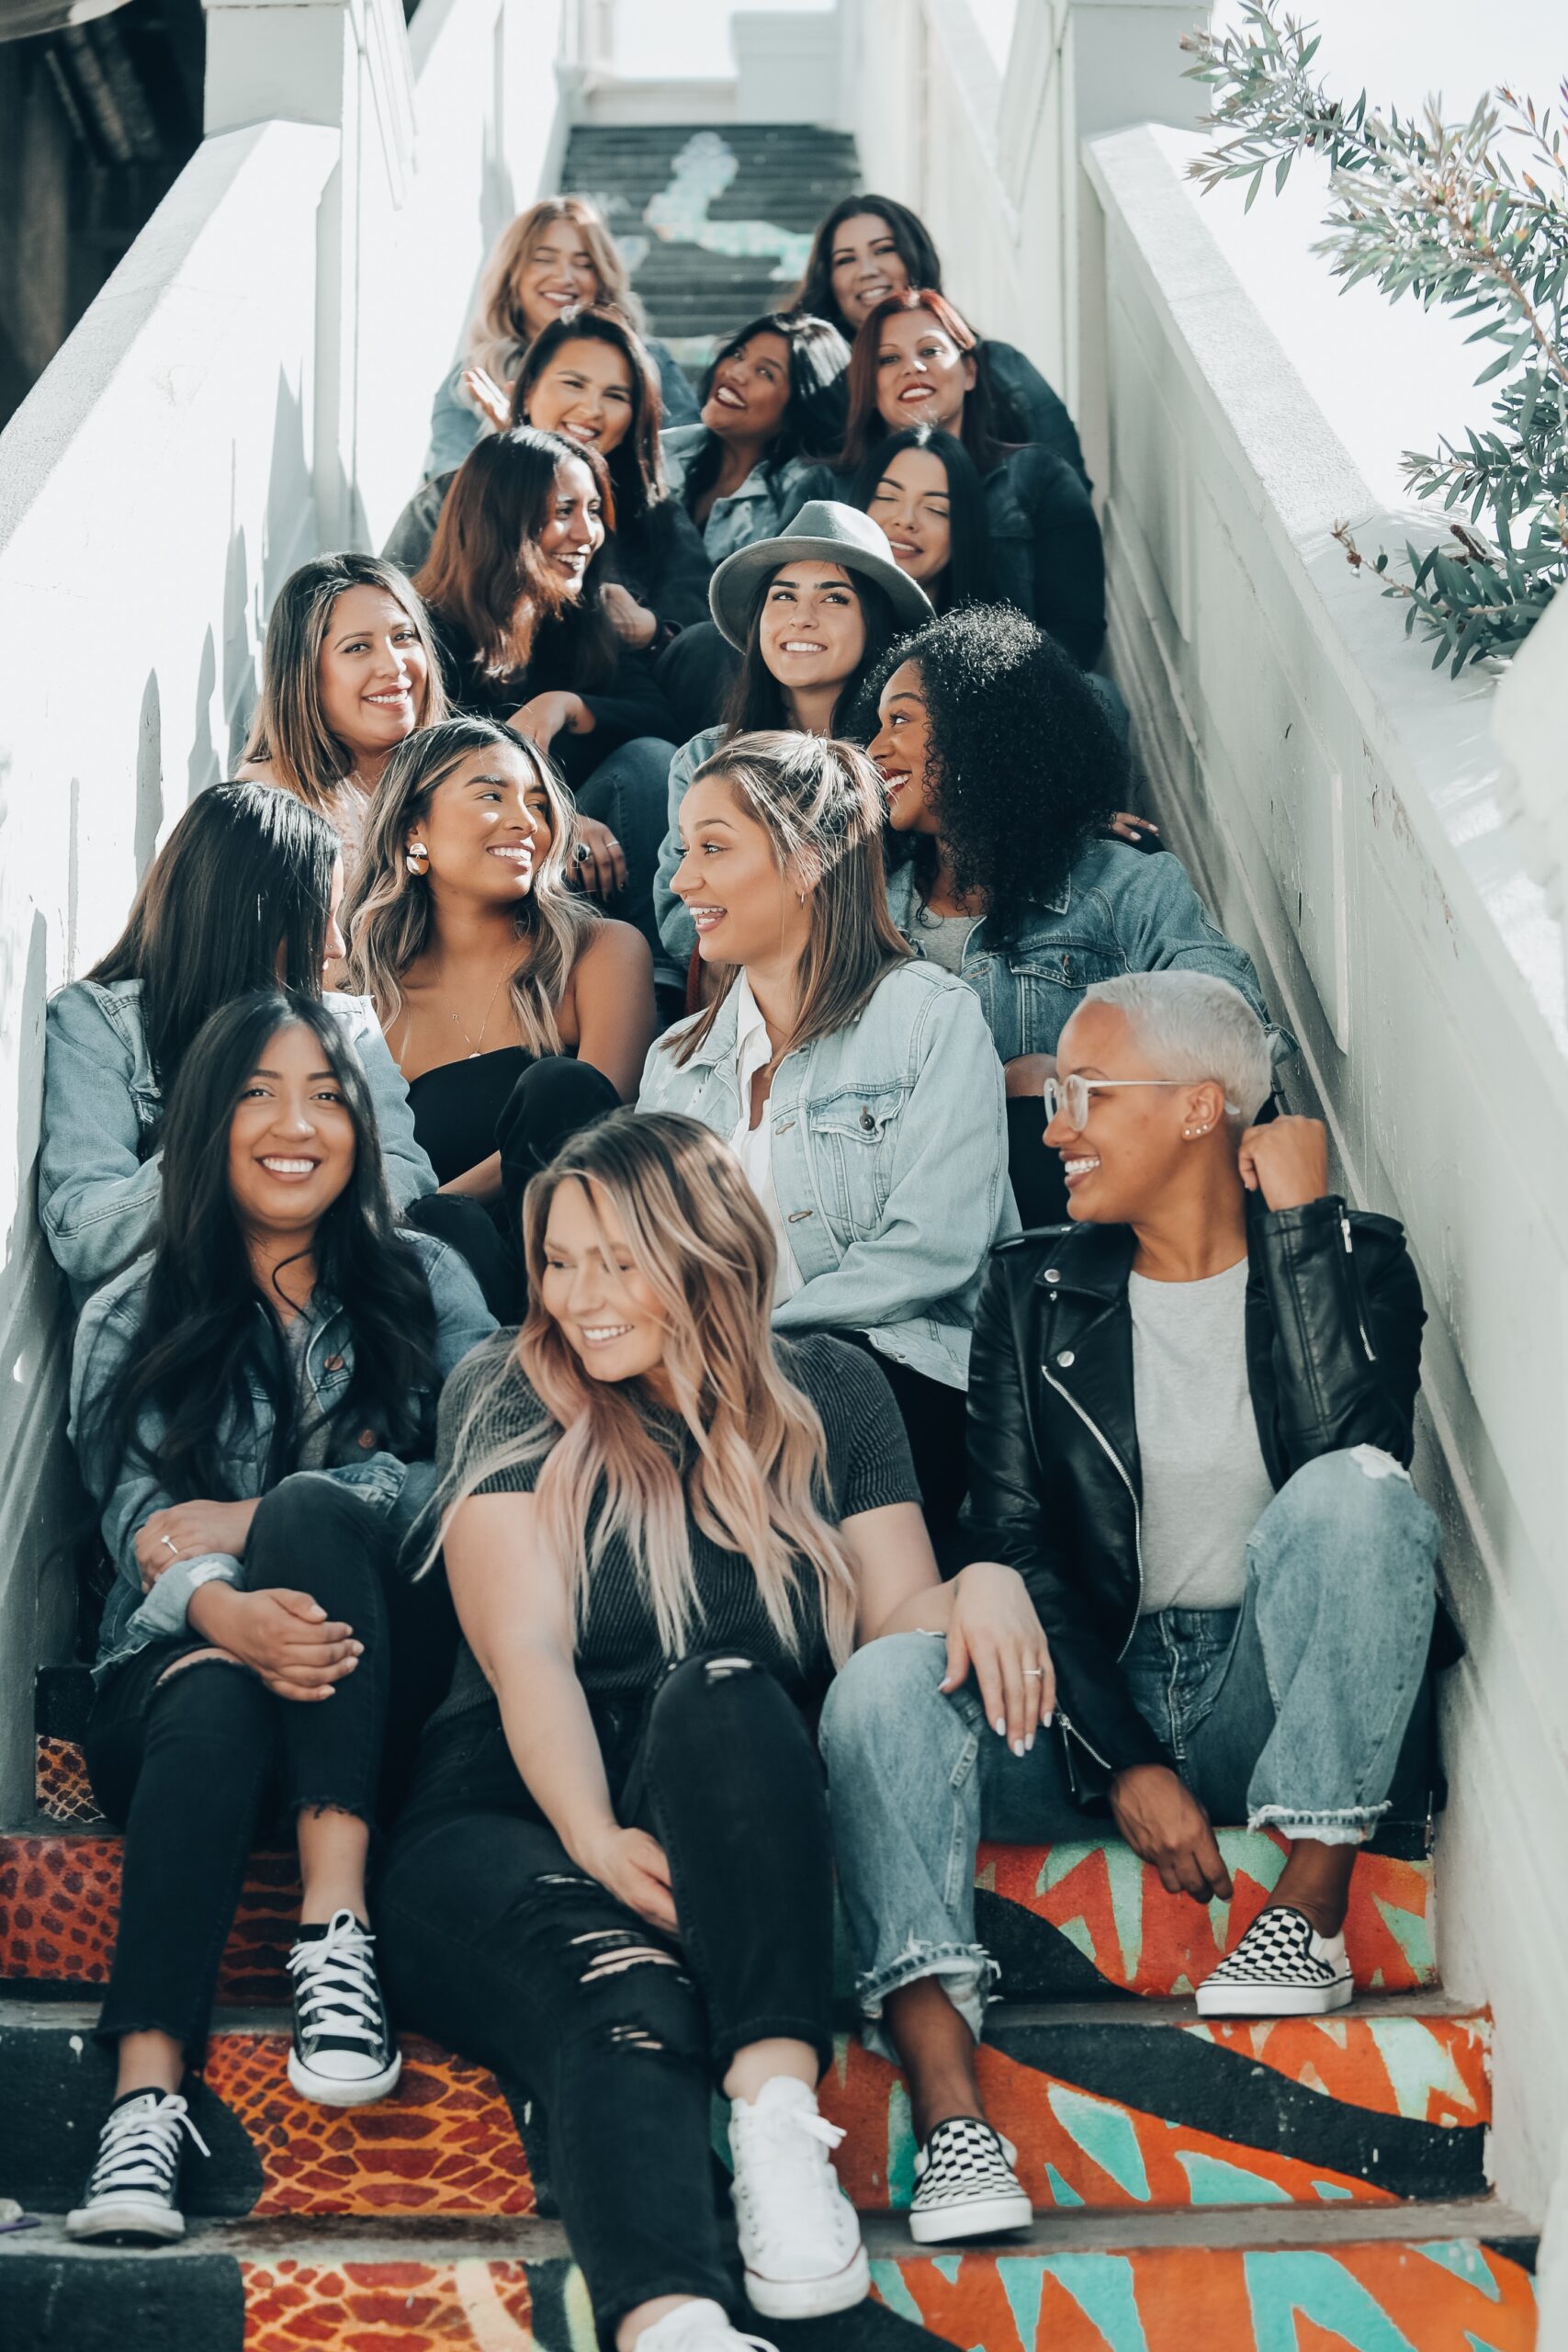 The Place of Micro Influencers in Influencer Marketing